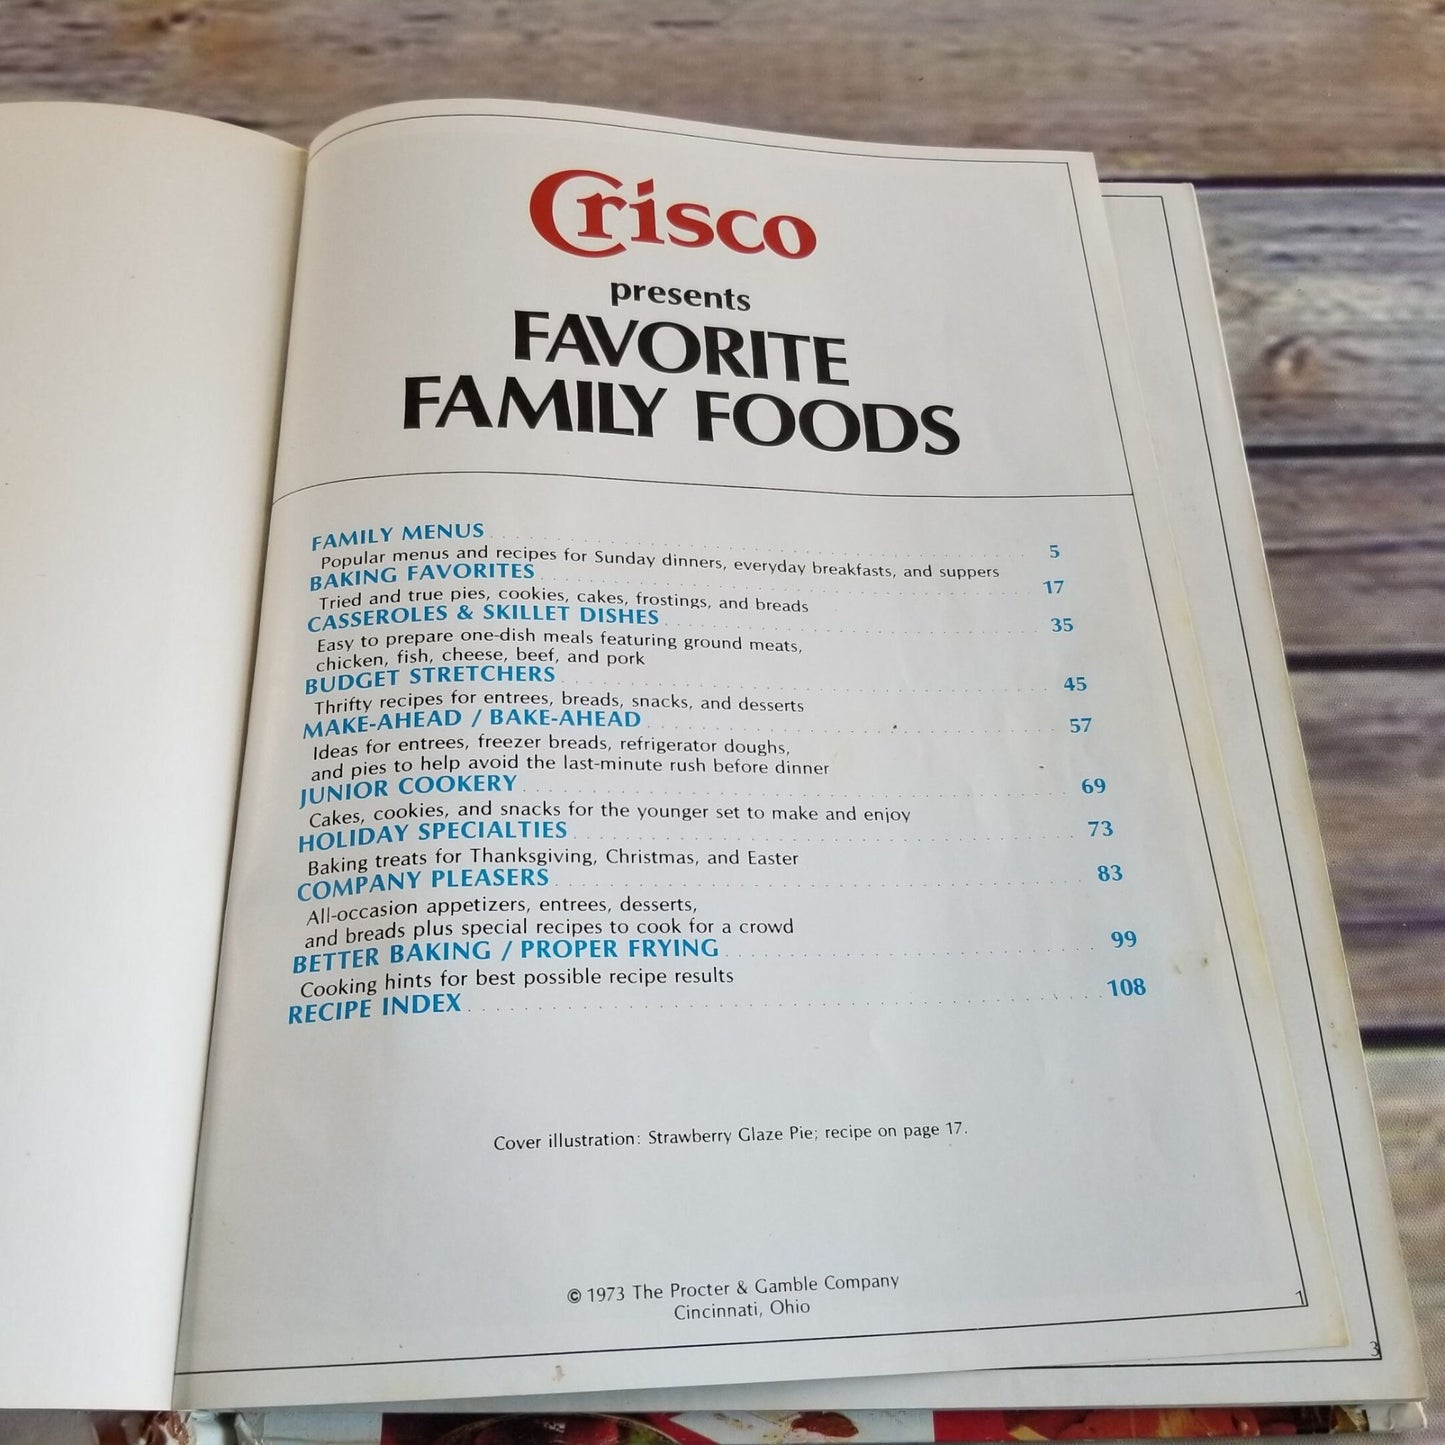 Vintage Cook Book Crisco Favorite Family Foods Cookbook Crisco Recipes 1973 Hardcover Procter and Gamble Promo